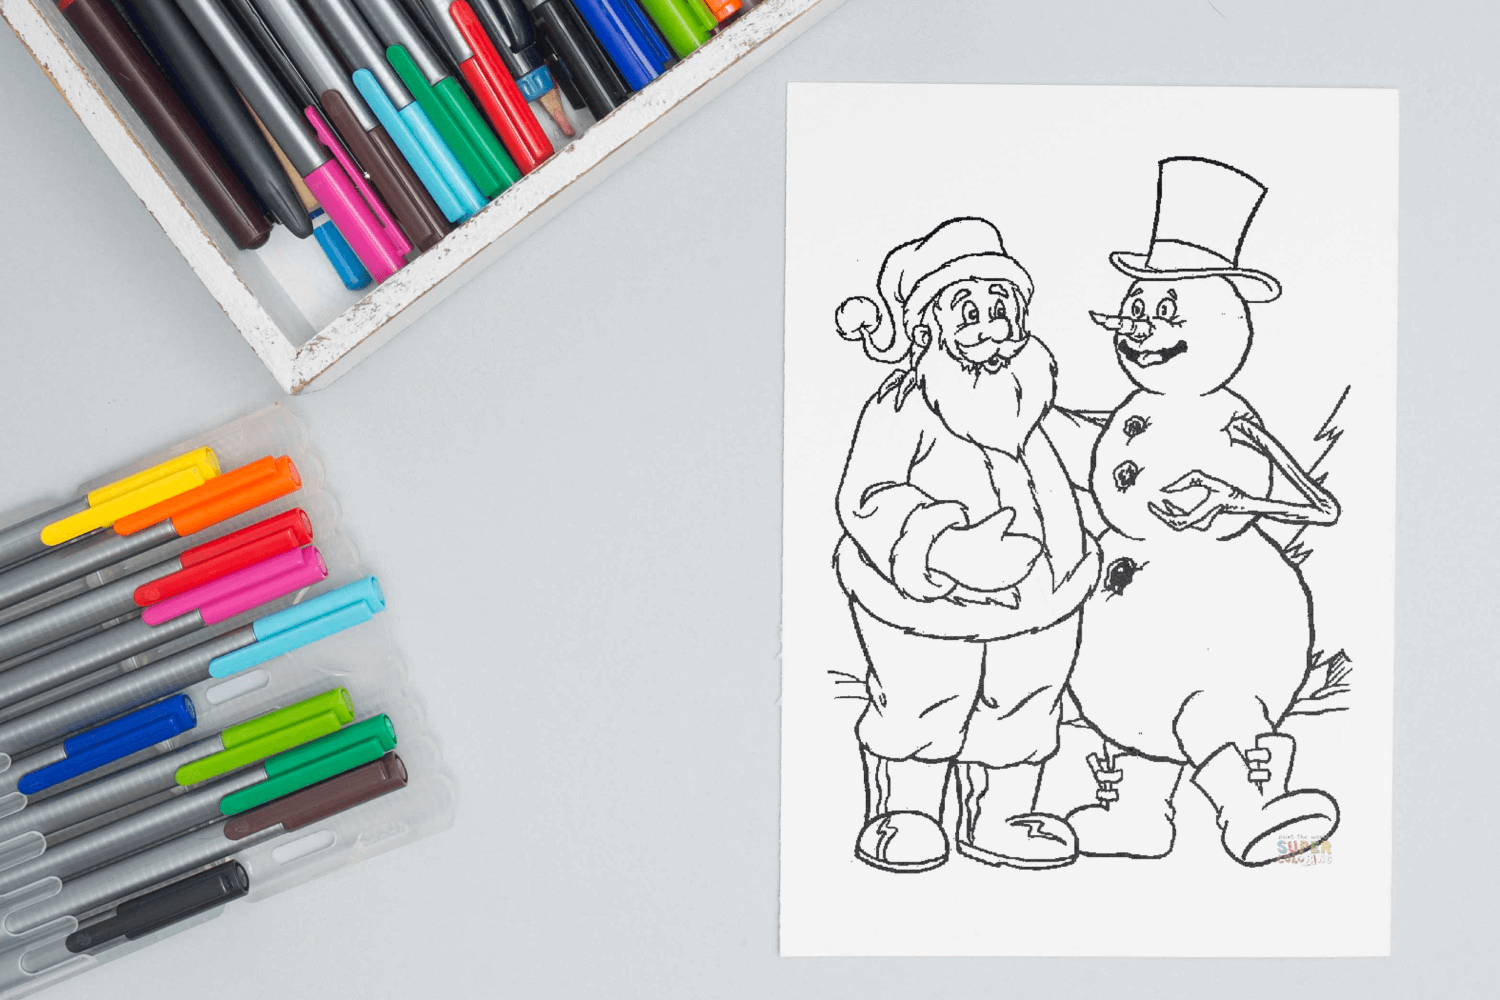 Santa and the Snowman coloring page facebook image.